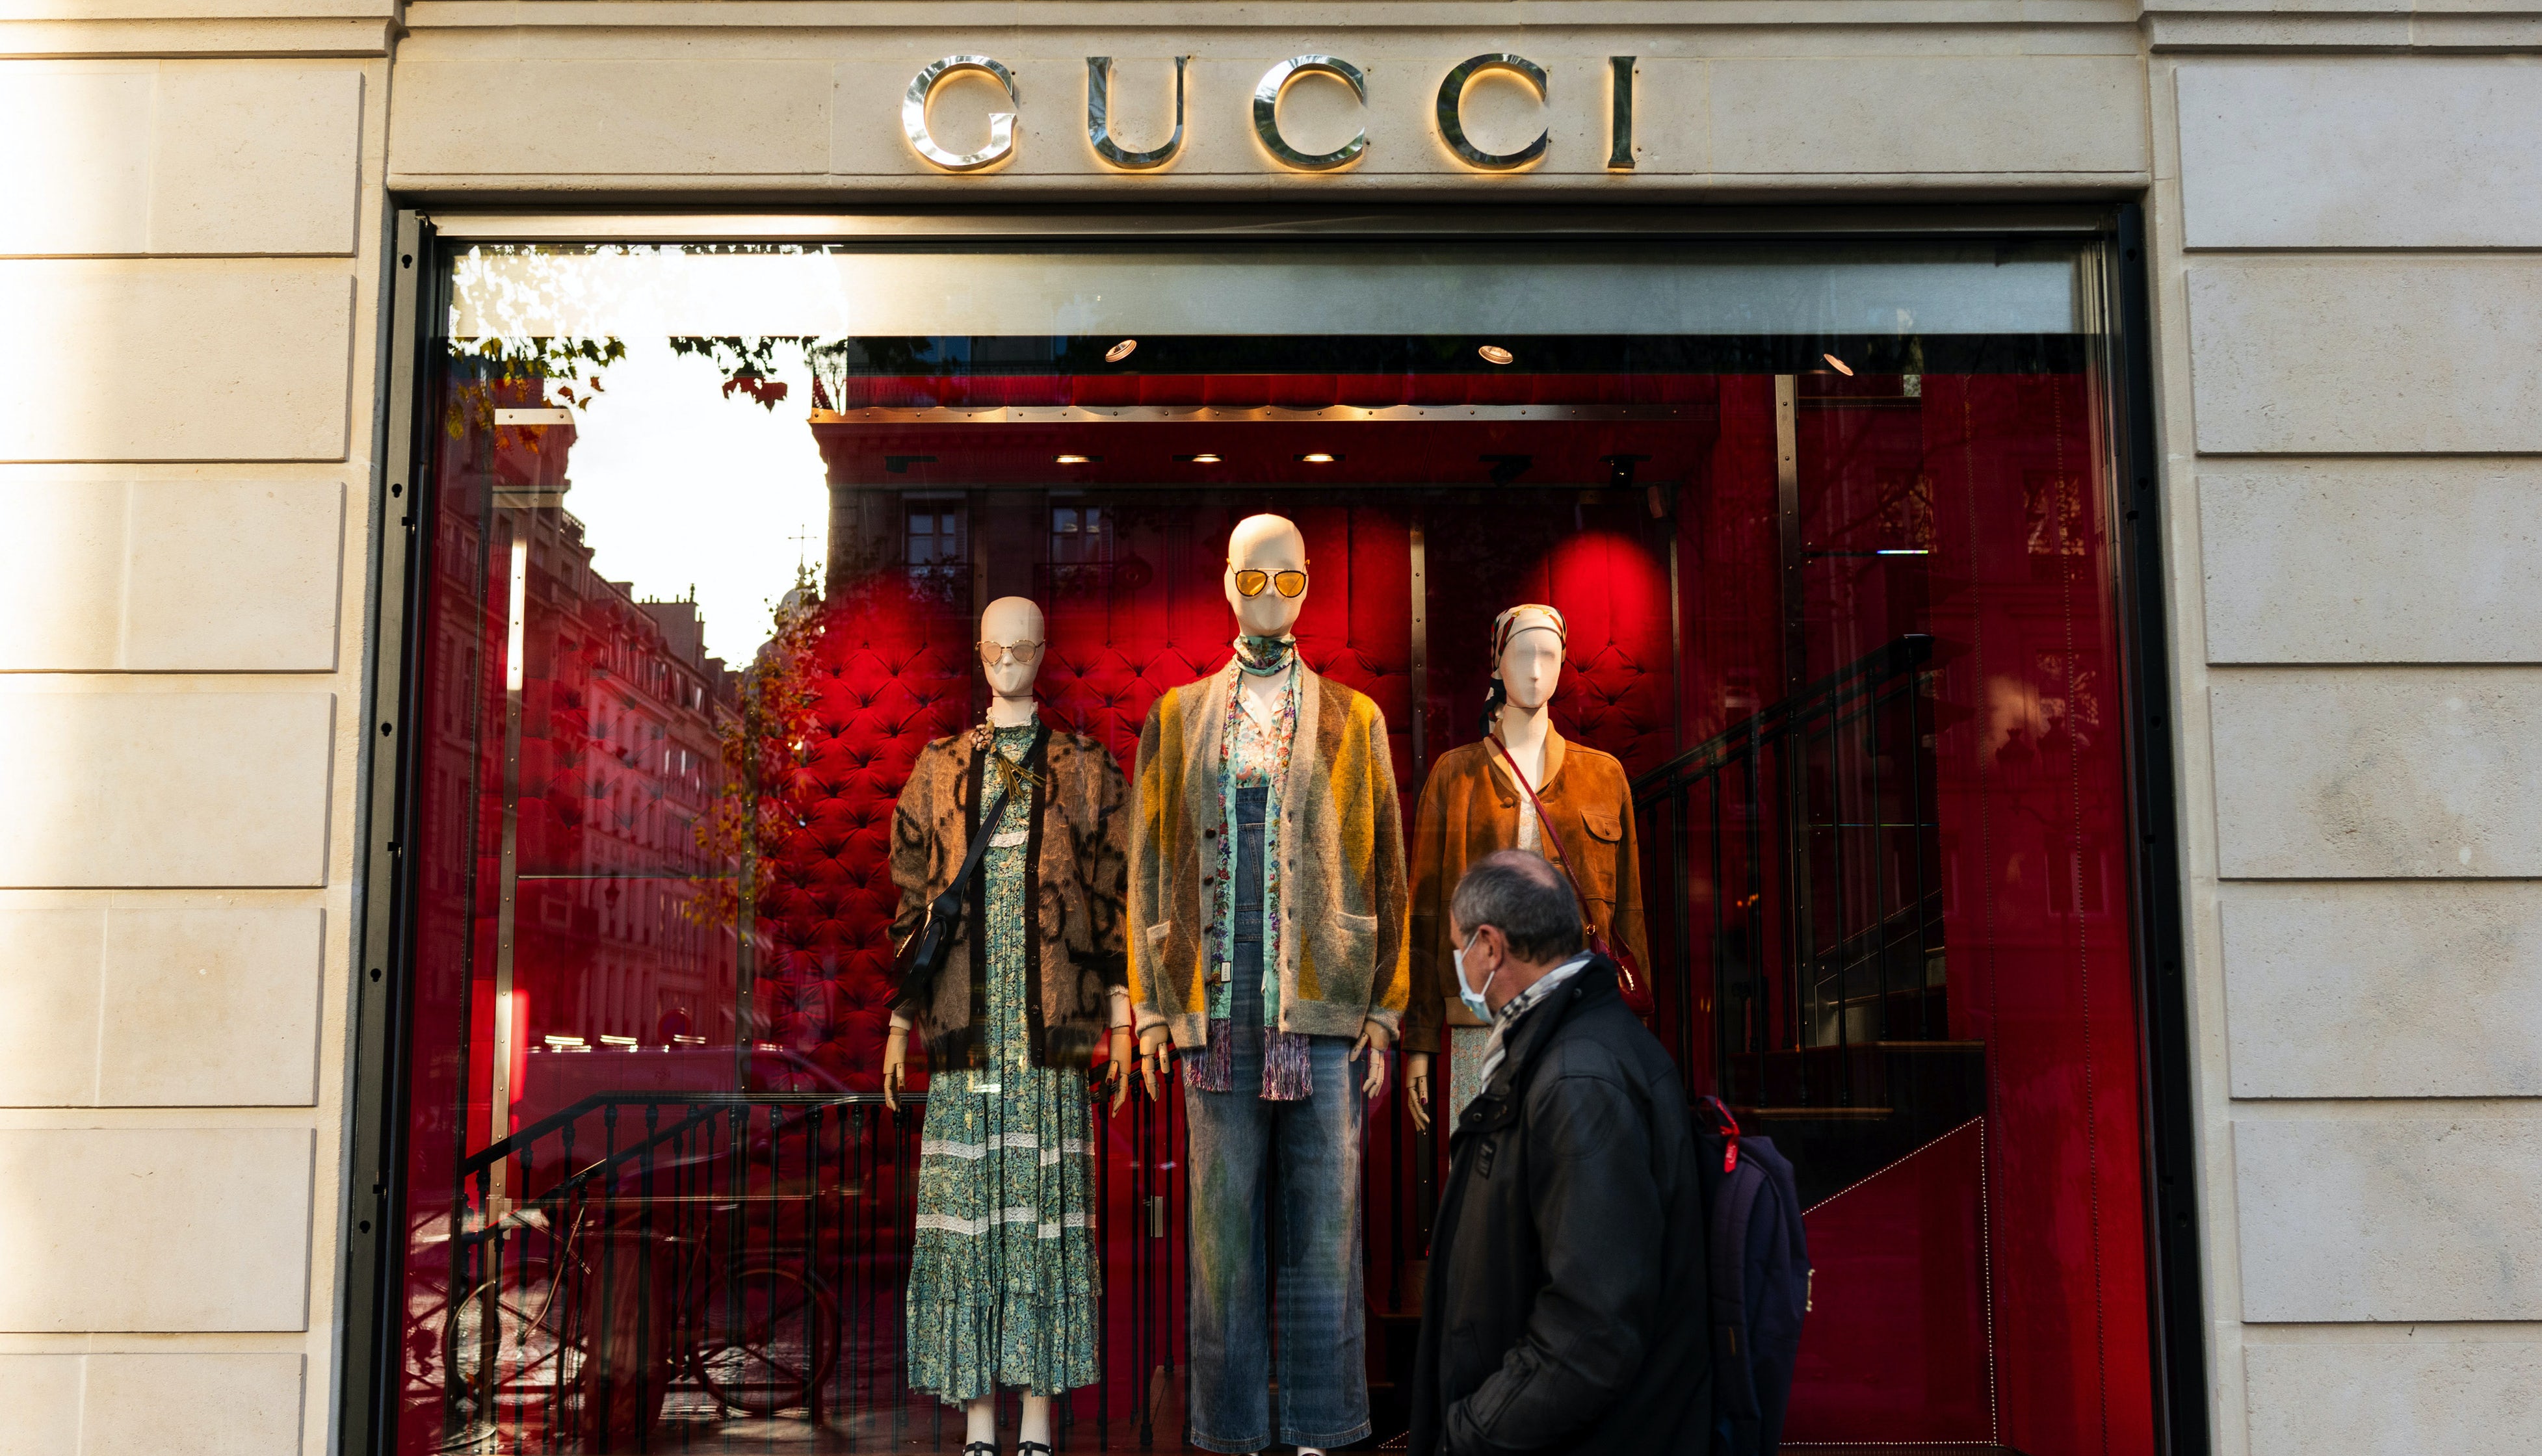 Kering and LVMH choices on layoffs prove sensitive in France, not in Italy  - LaConceria